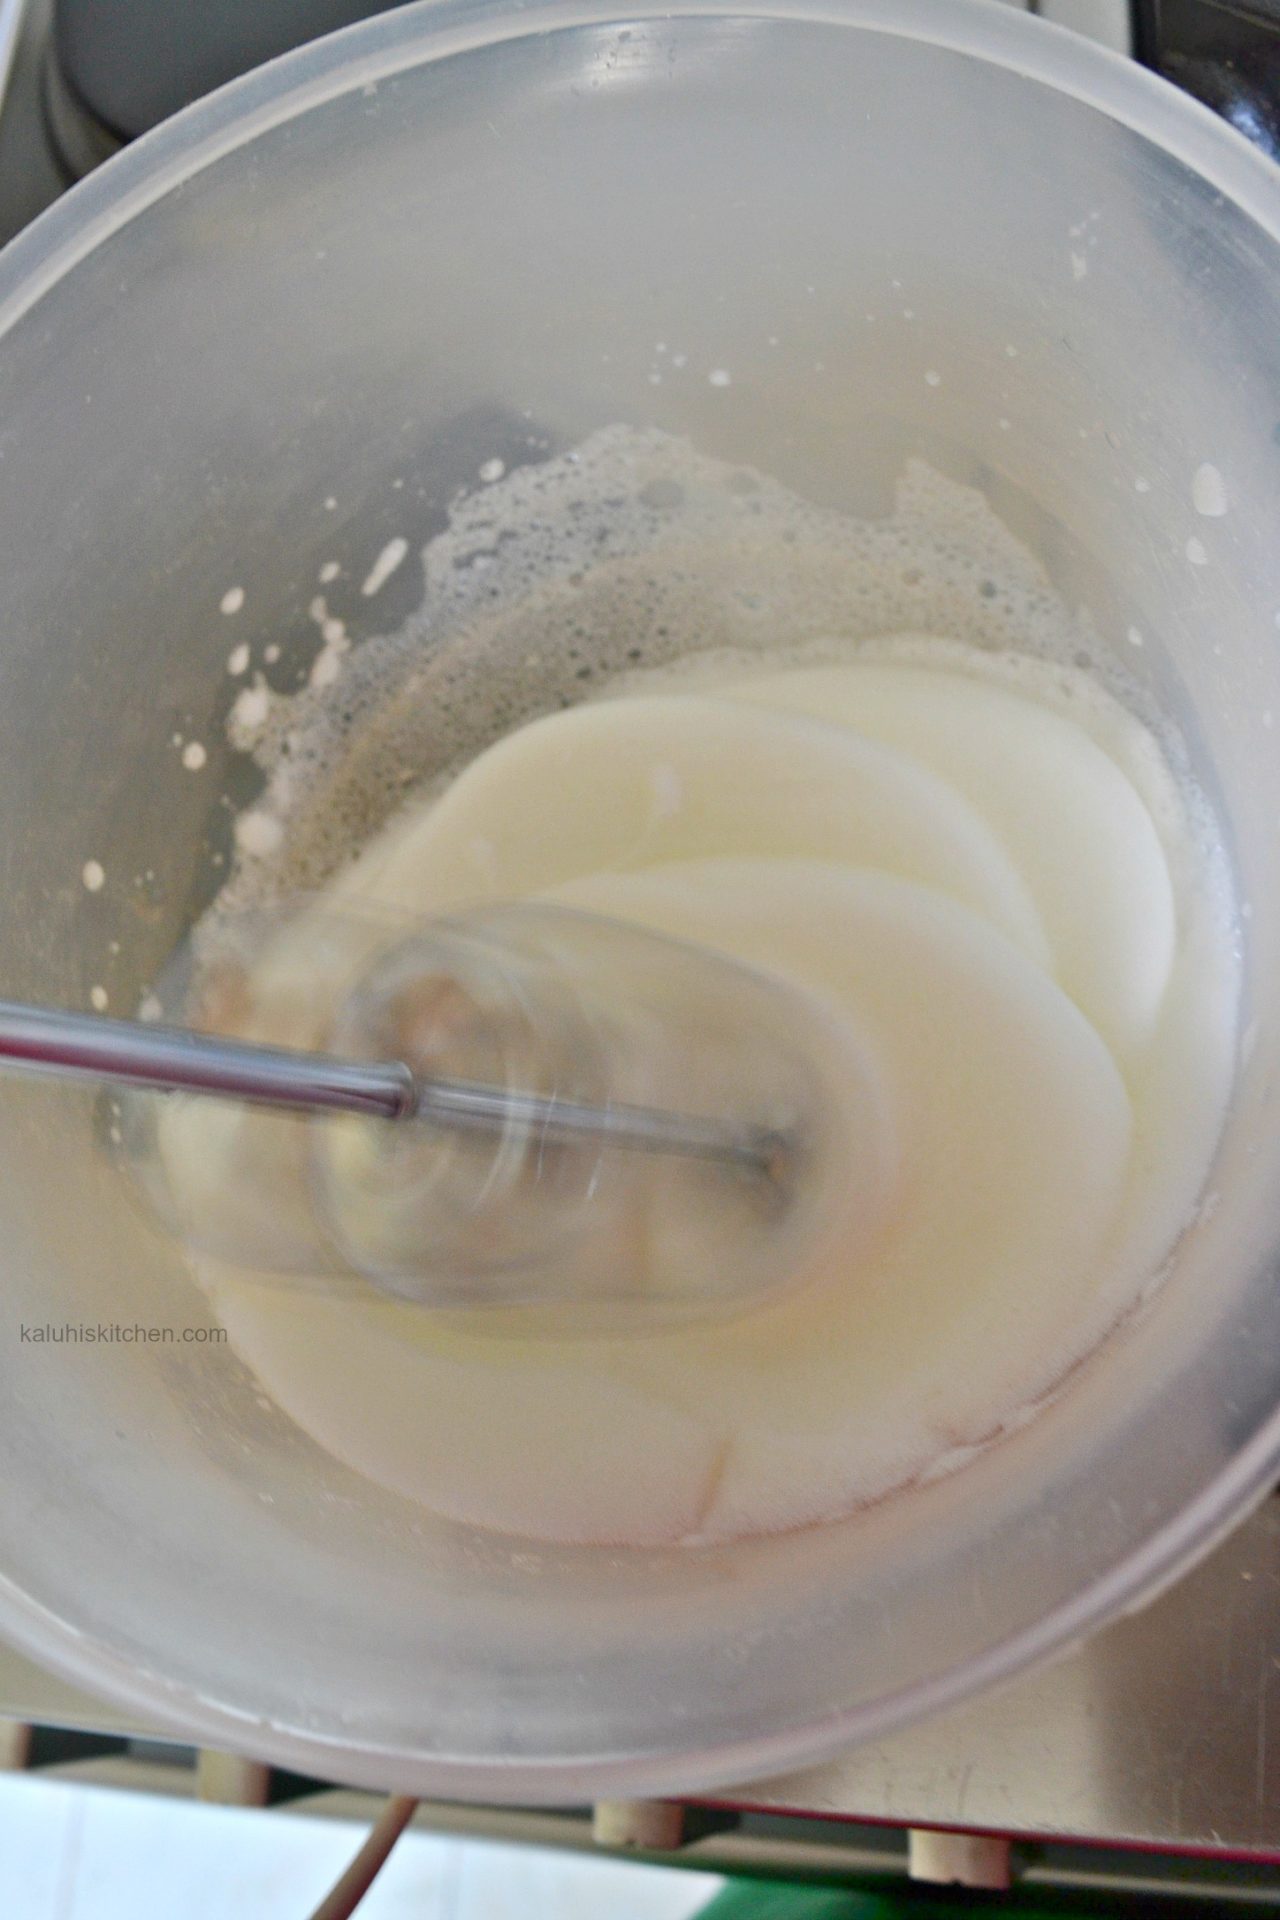 beat the sugar with egg whites i=until it becomes fluffy and white_how to make chocolate mousse